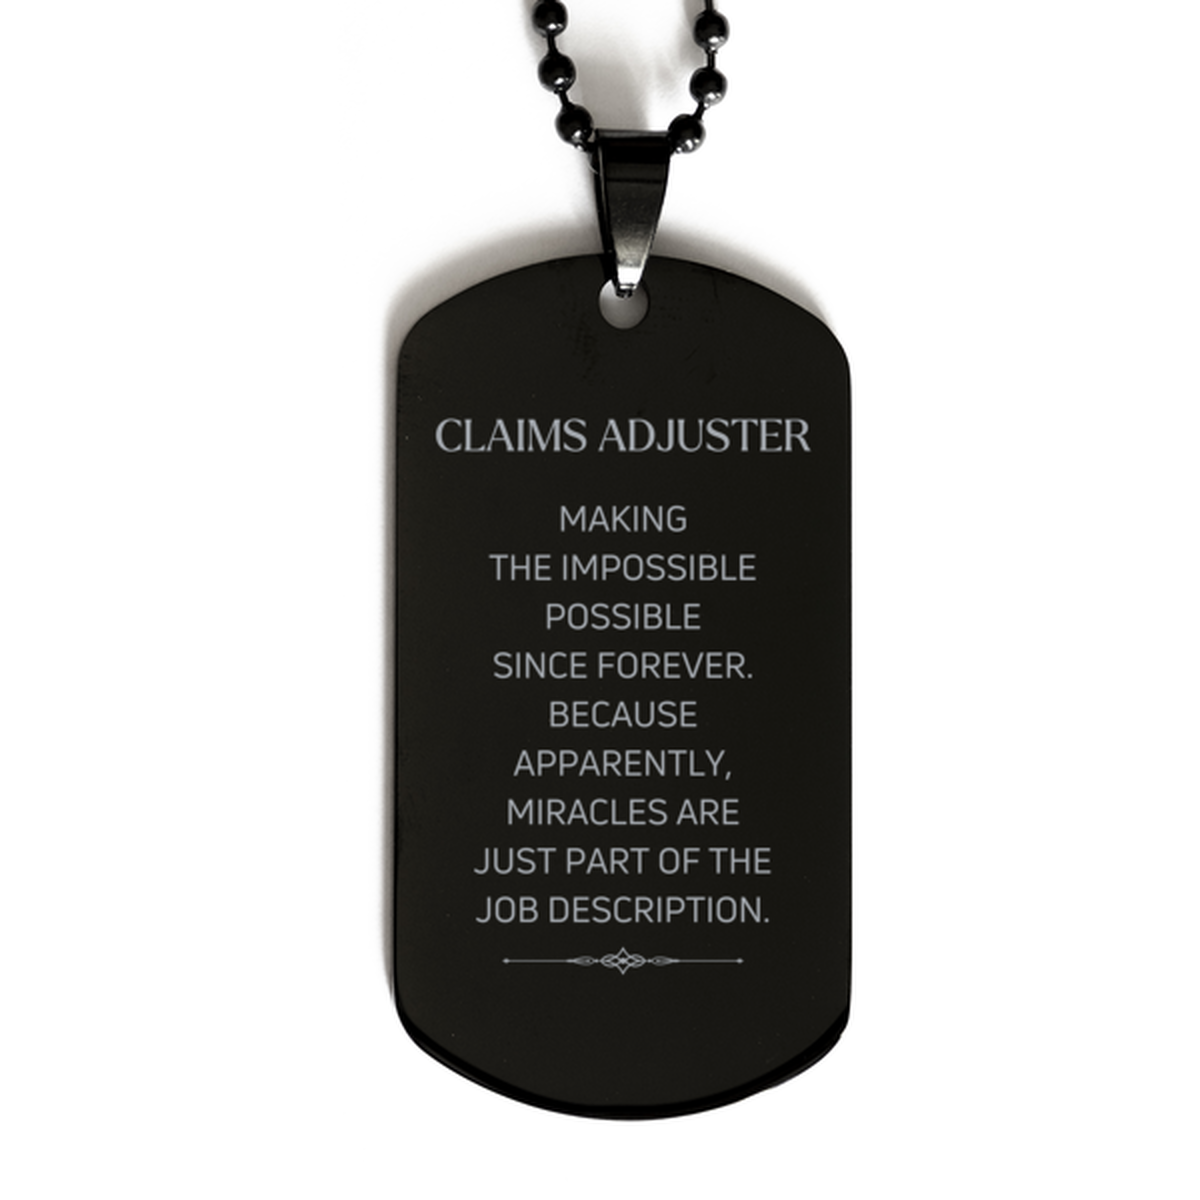 Funny Claims Adjuster Gifts, Miracles are just part of the job description, Inspirational Birthday Black Dog Tag For Claims Adjuster, Men, Women, Coworkers, Friends, Boss